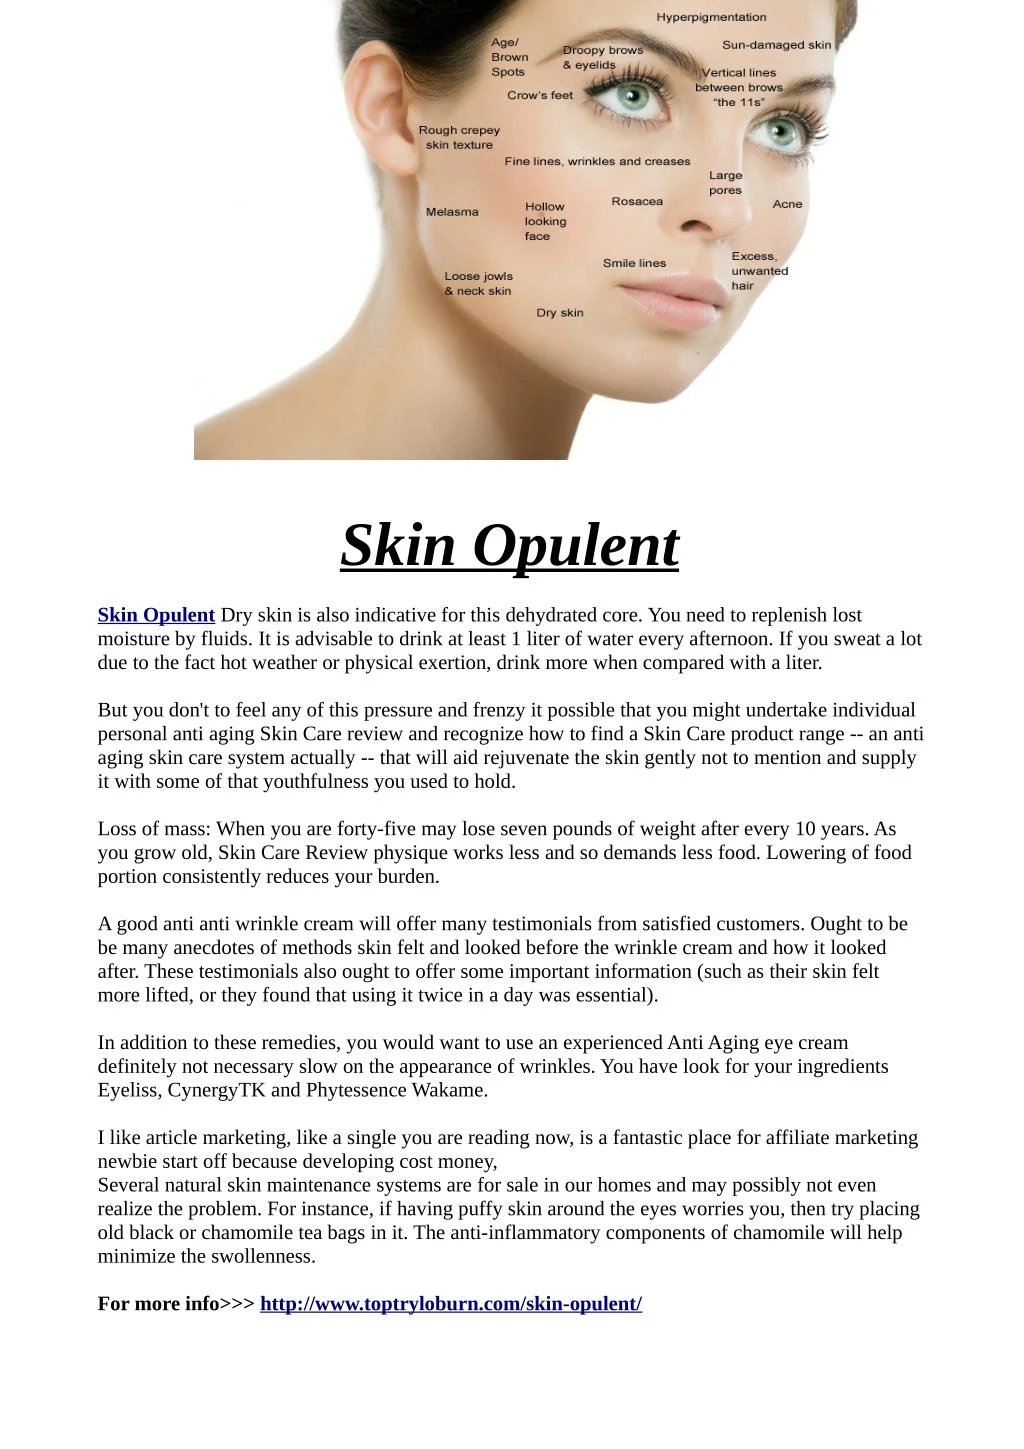 ppt-facial-skin-care-treatment-tips-powerpoint-presentation-free